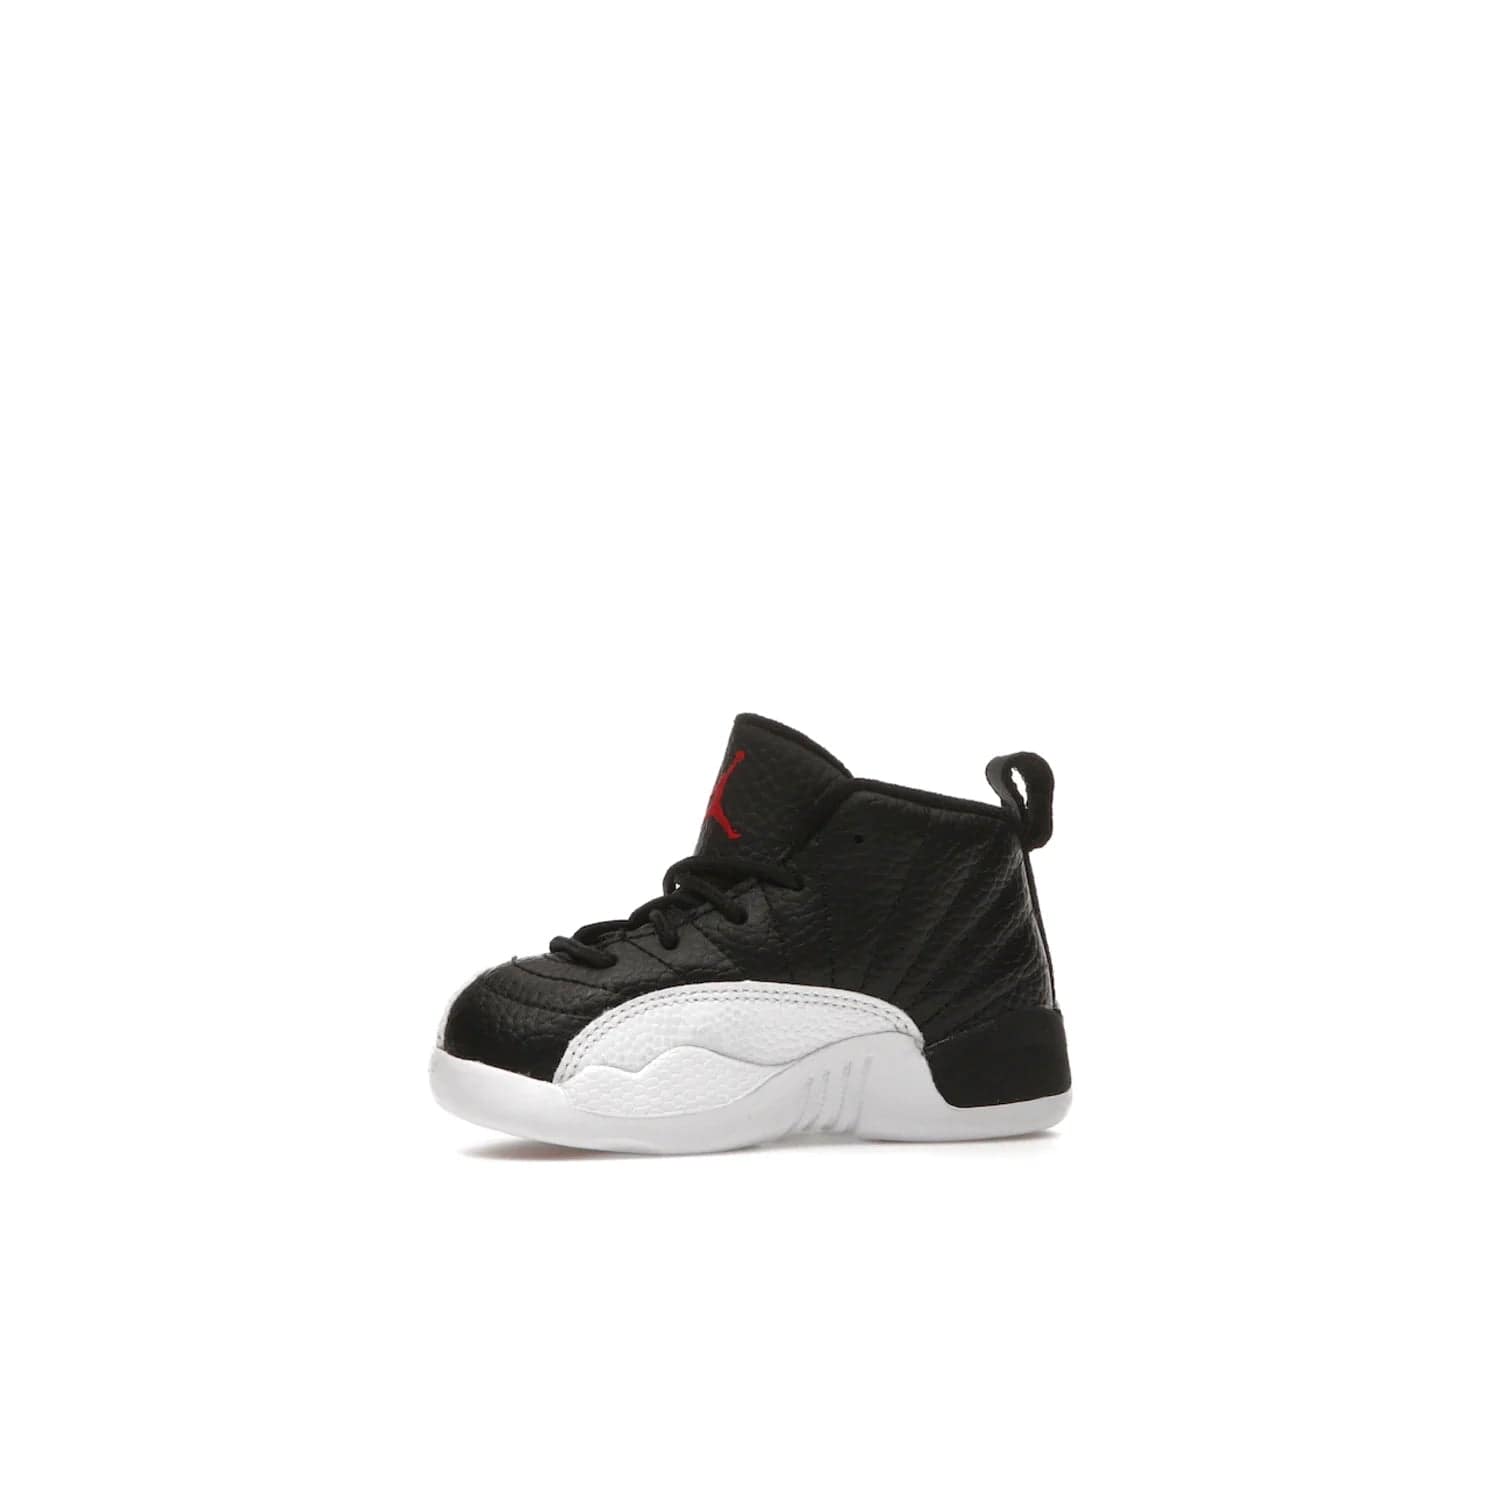 Jordan 12 Retro Playoffs (2022) (TD) - Image 17 - Only at www.BallersClubKickz.com - Stay stylish with the Air Jordan 12 Retro Playoffs 2022 (TD) toddler shoe. All-black upper with red and white accents plus subtle gold details. Bright white midsole and sole. Perfect for any outing or special event.